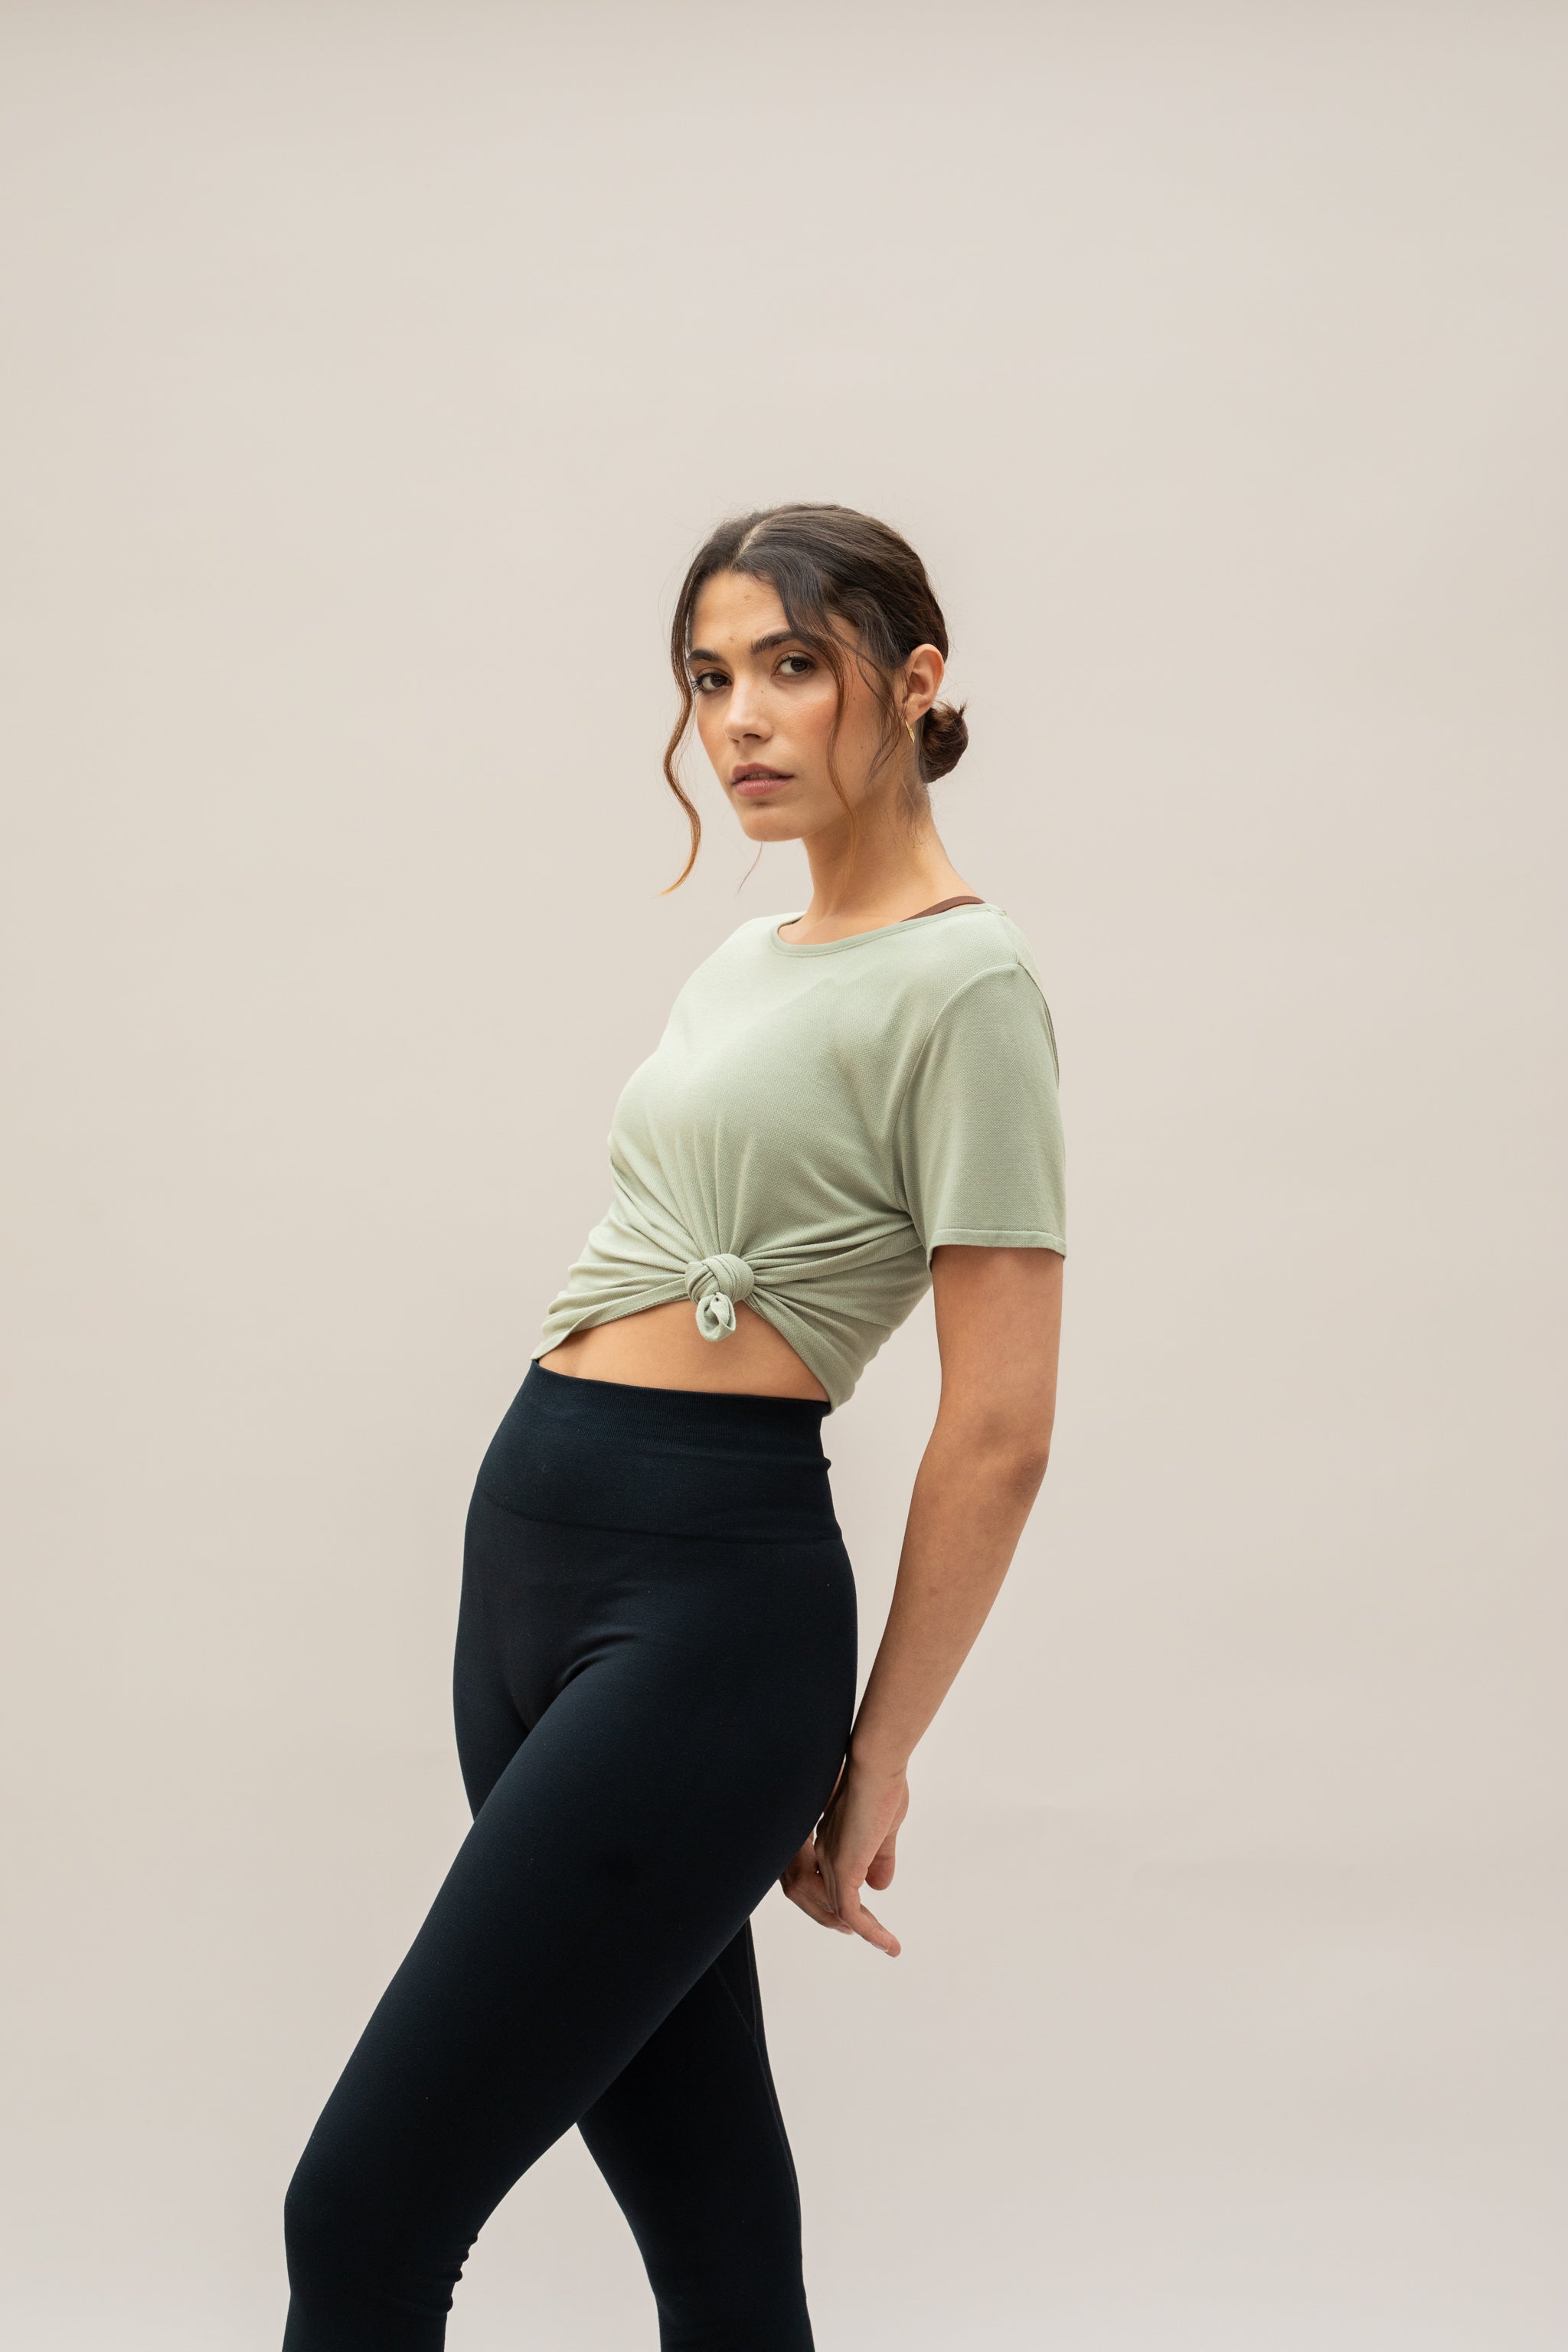 Model wearing green t-shirt for sustainable activewear brand, Jilla